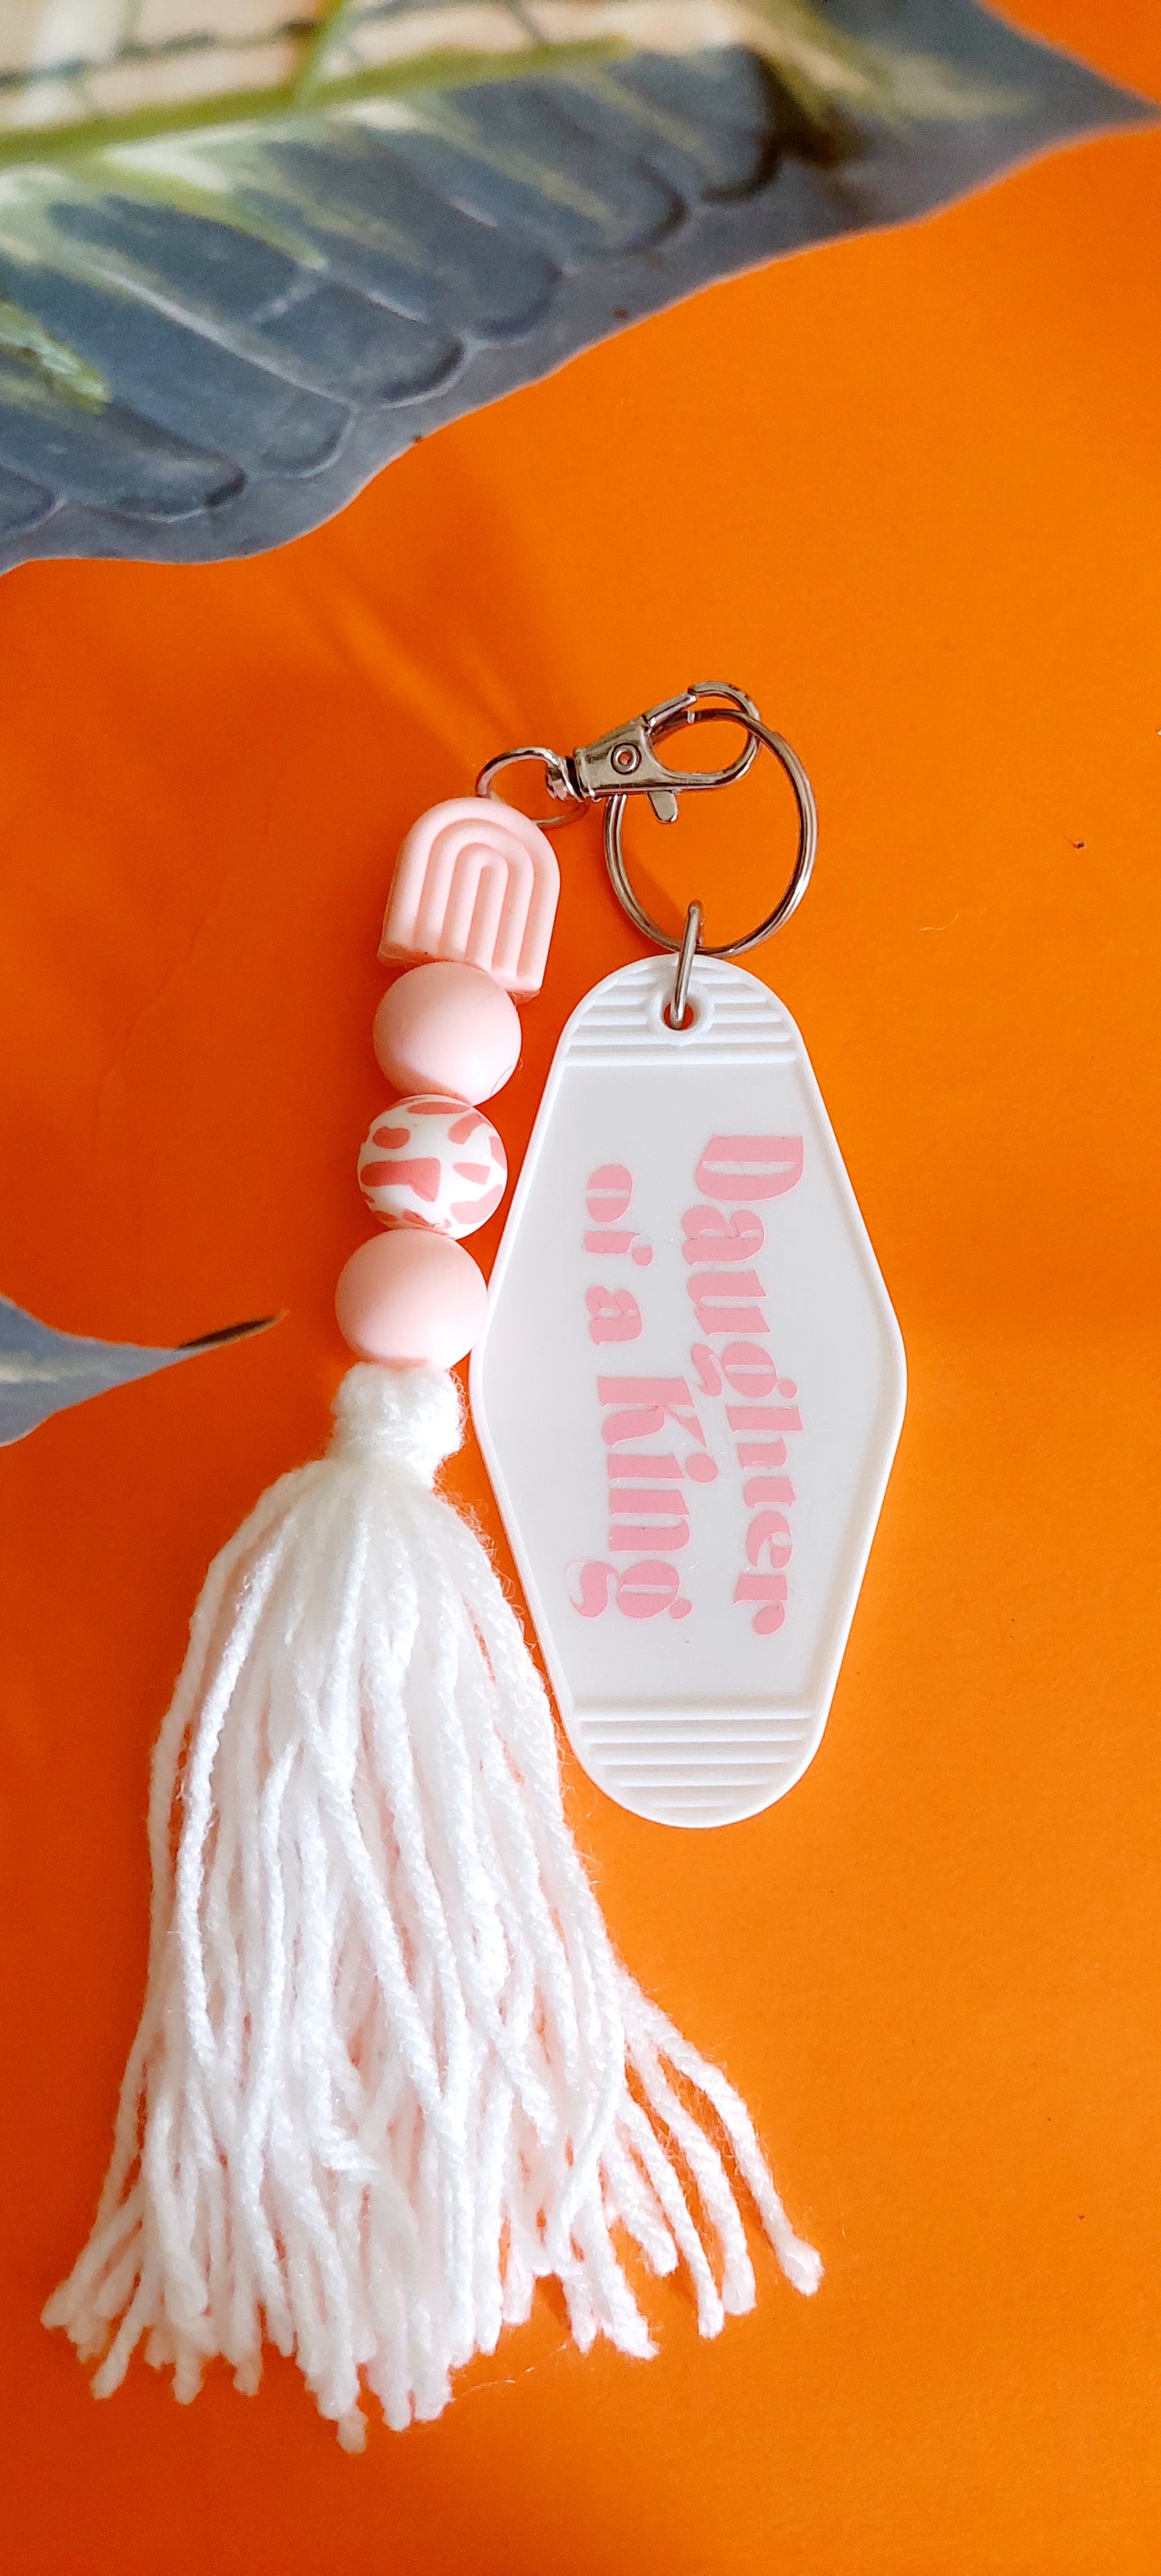 Daughter Of A King Keychain